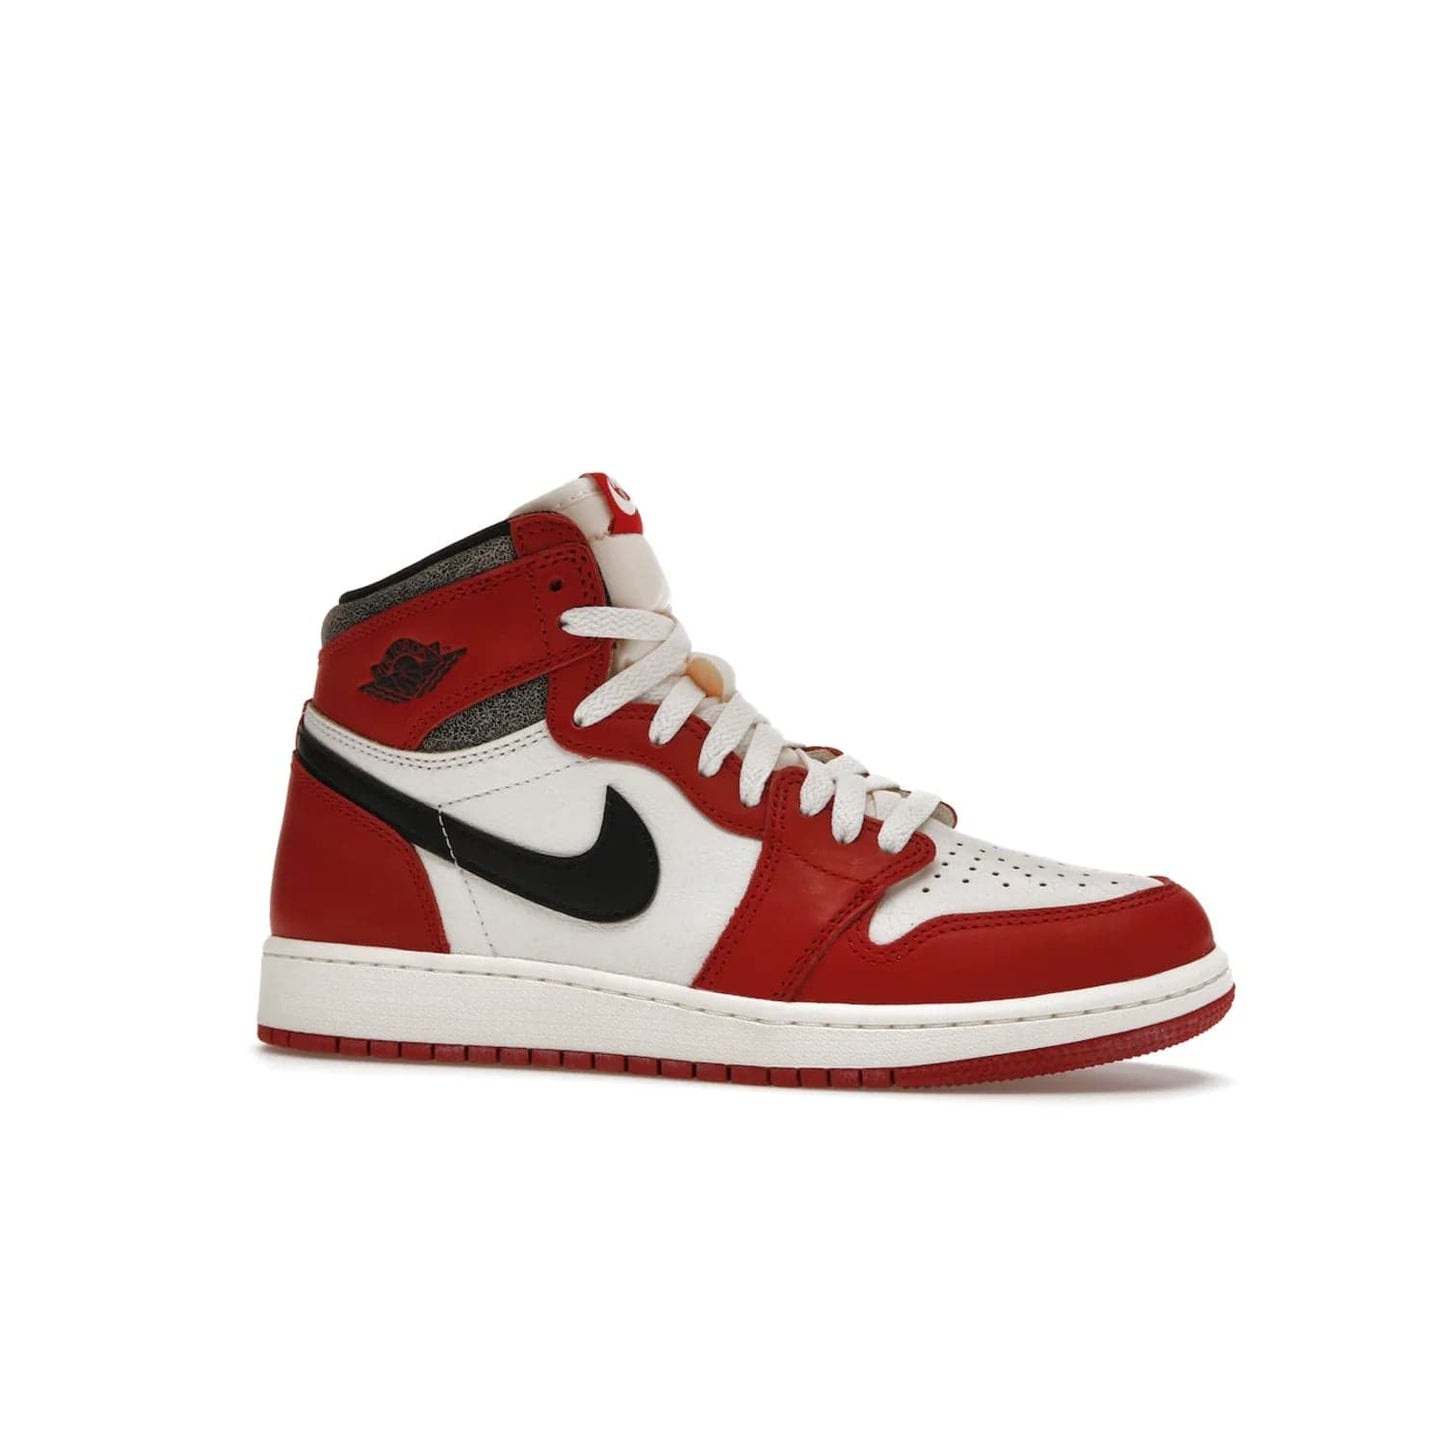 Jordan 1 Retro High OG Chicago Lost and Found (GS) - Image 3 - Only at www.BallersClubKickz.com - Grab the Air Jordan 1 Retro High OG Chicago Reimagined GS, presenting in classic 1985 silhouette. Varsity Red, Black, Muslin and Sail hues, featuring Nike Air branding, Wings on the collars and printed insoles. Don't miss out when it releases 19th Nov 2022.